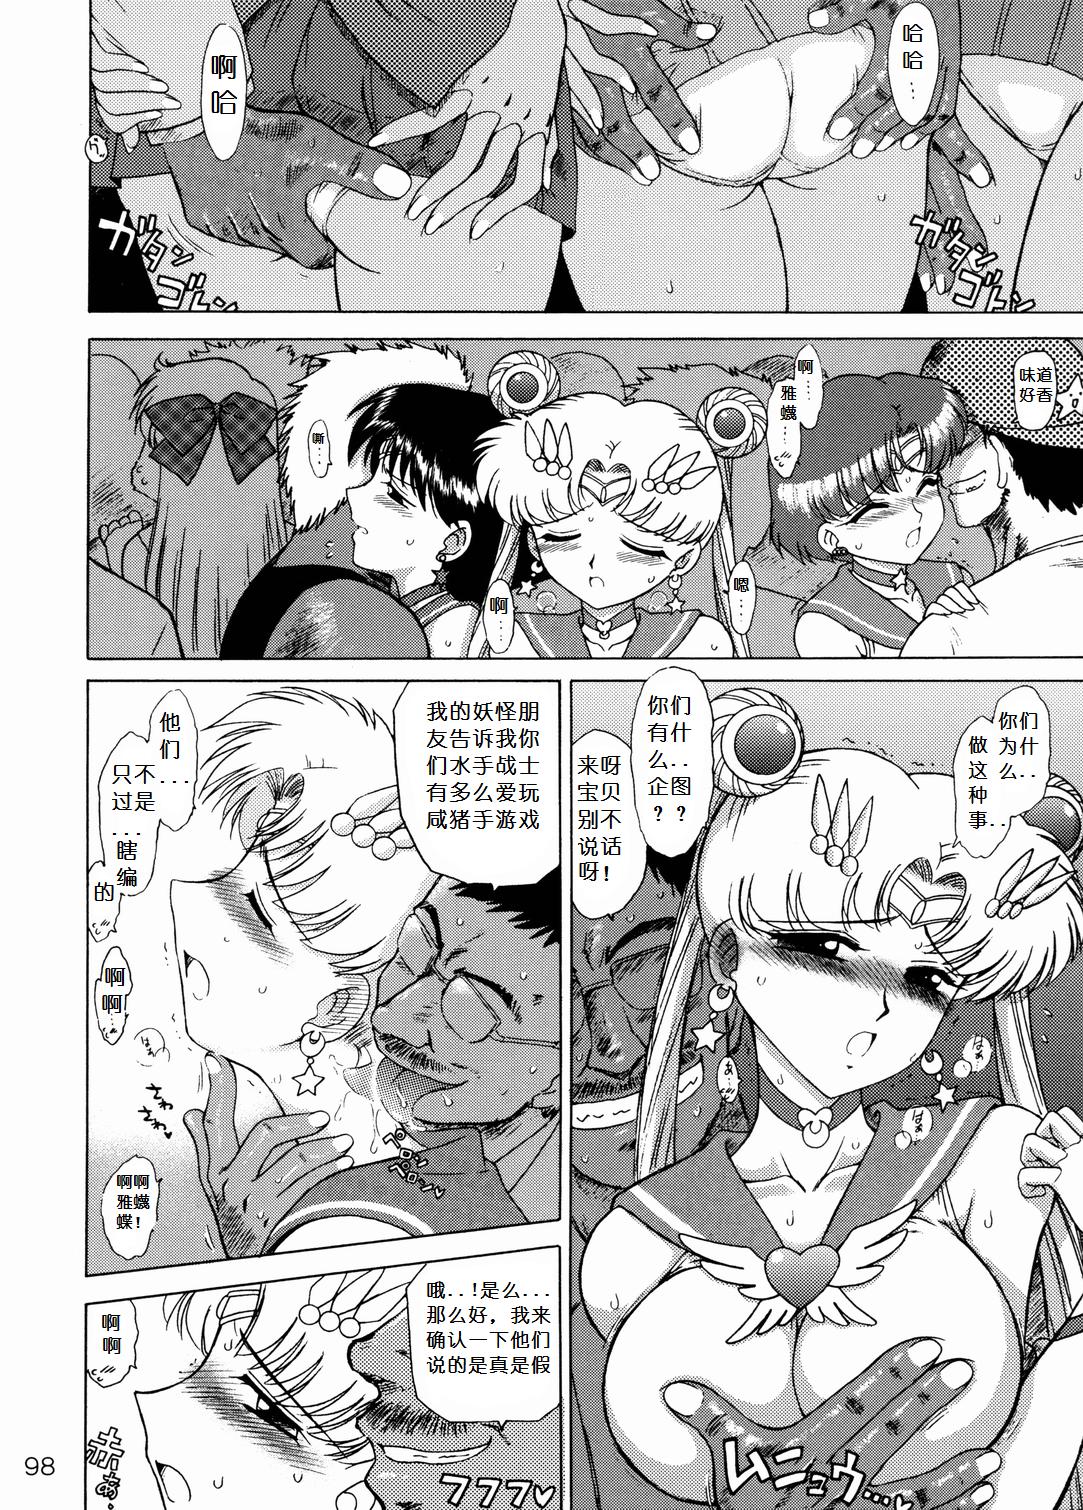 Nasty Free Porn The Grateful Dead - Sailor moon Students - Page 6